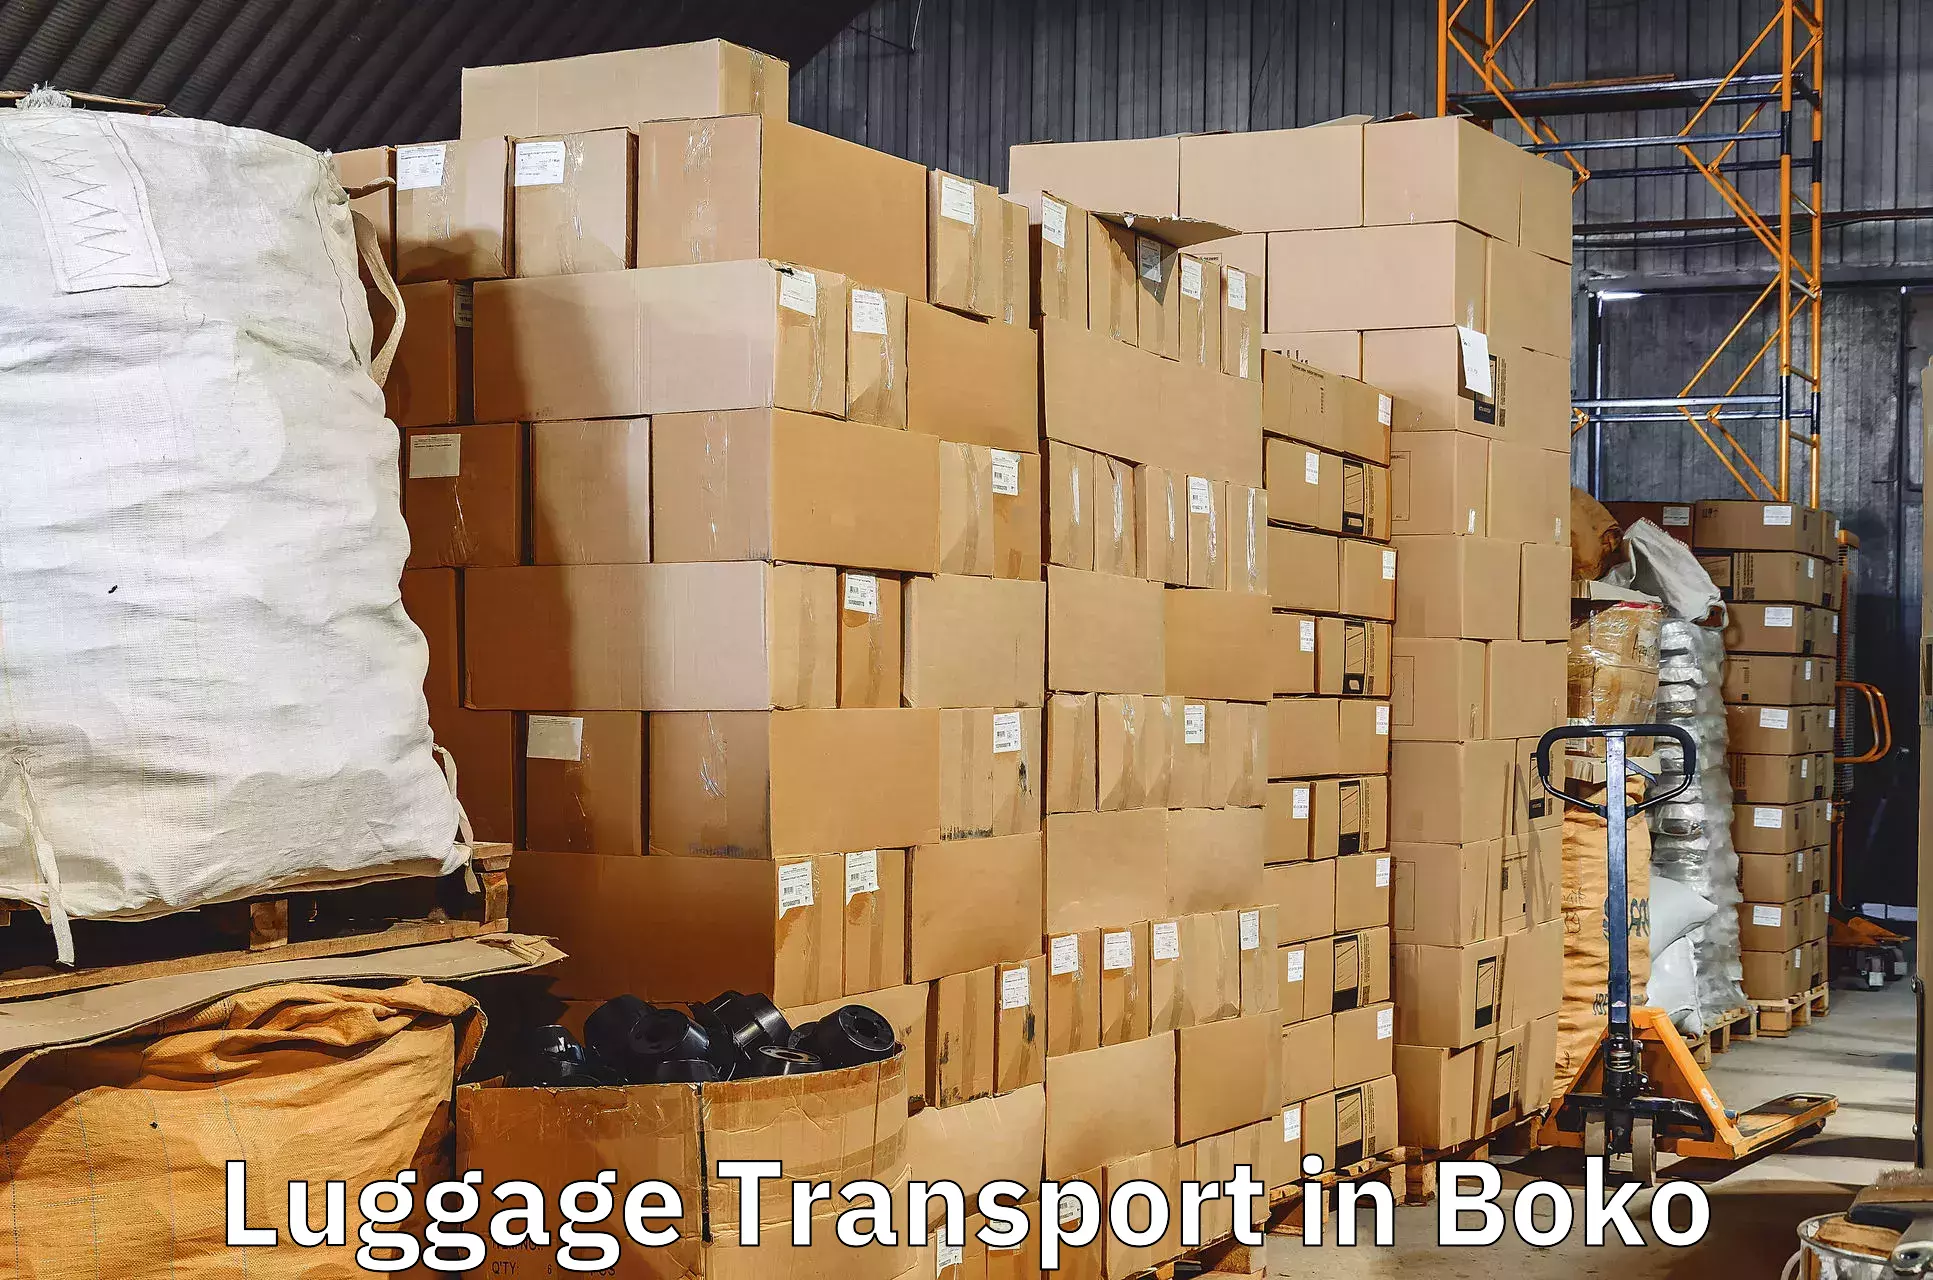 Express luggage delivery in Boko